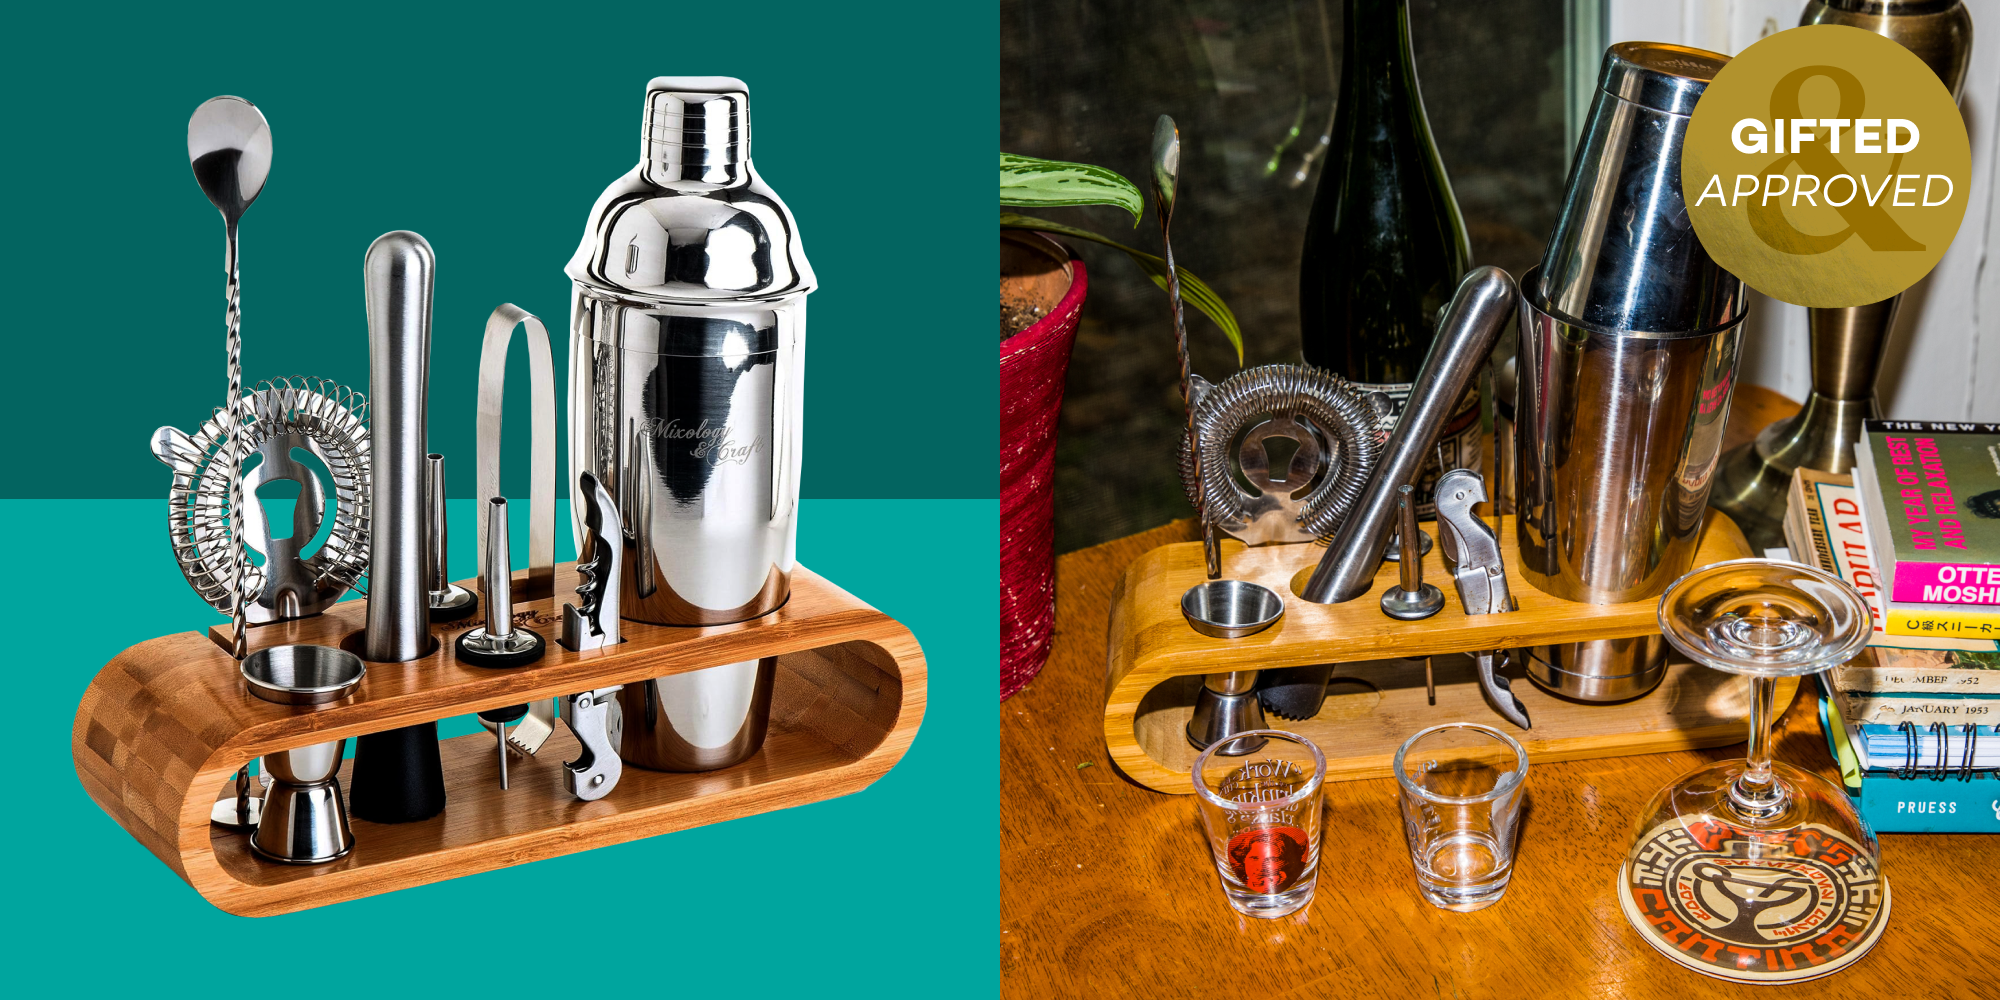 The Mixology & Craft Bartender Kit: The Best Gift for the Budding